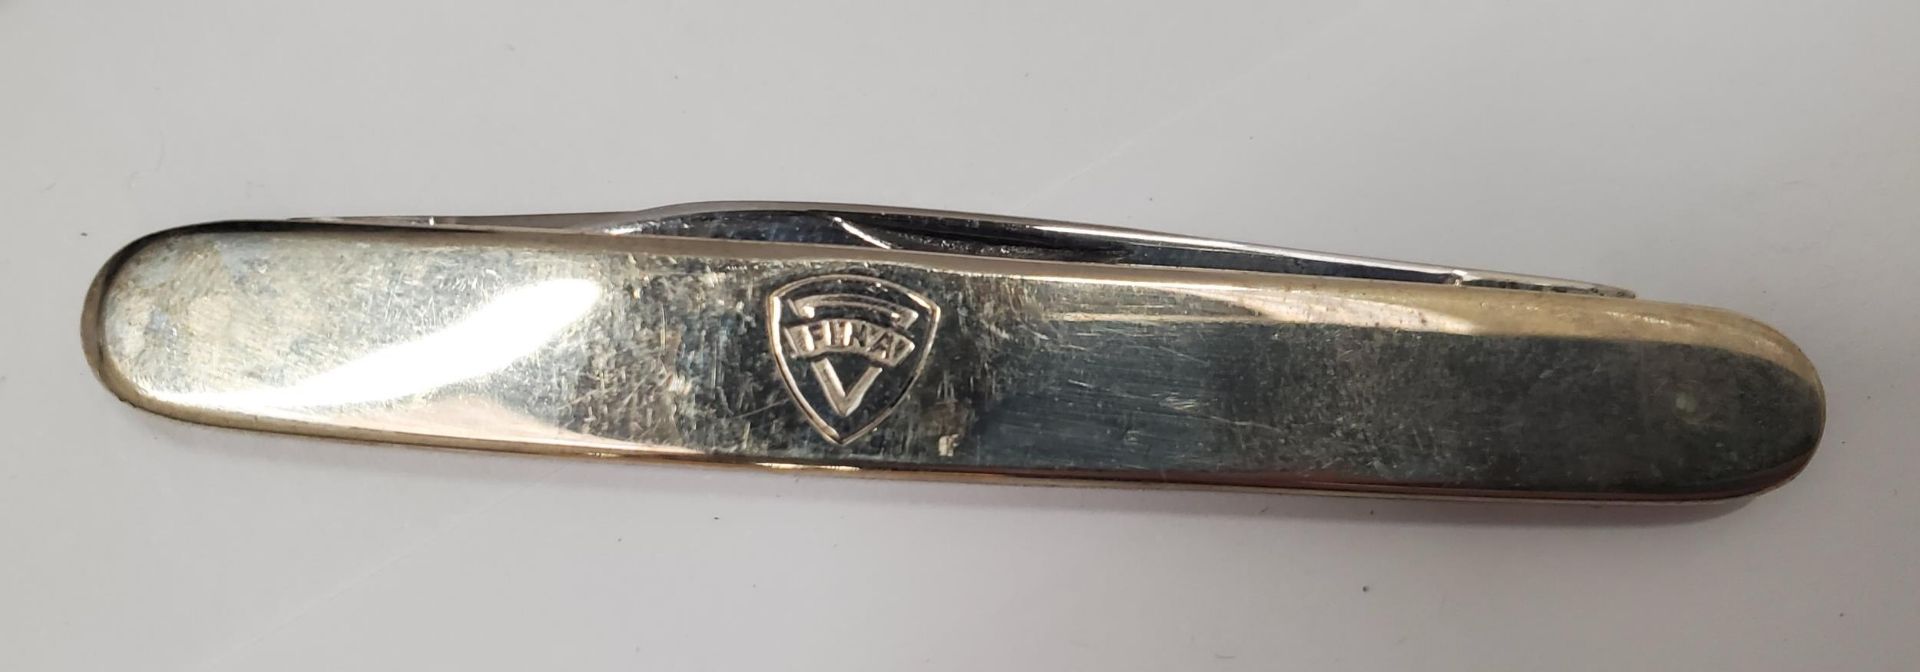 TWO VINTAGE PENKNIVES TO INCLUDE A FODEN AND FINA PLUS A 'RUSHOLME MOTOR CO.' TAPE MEASURE - Image 2 of 4